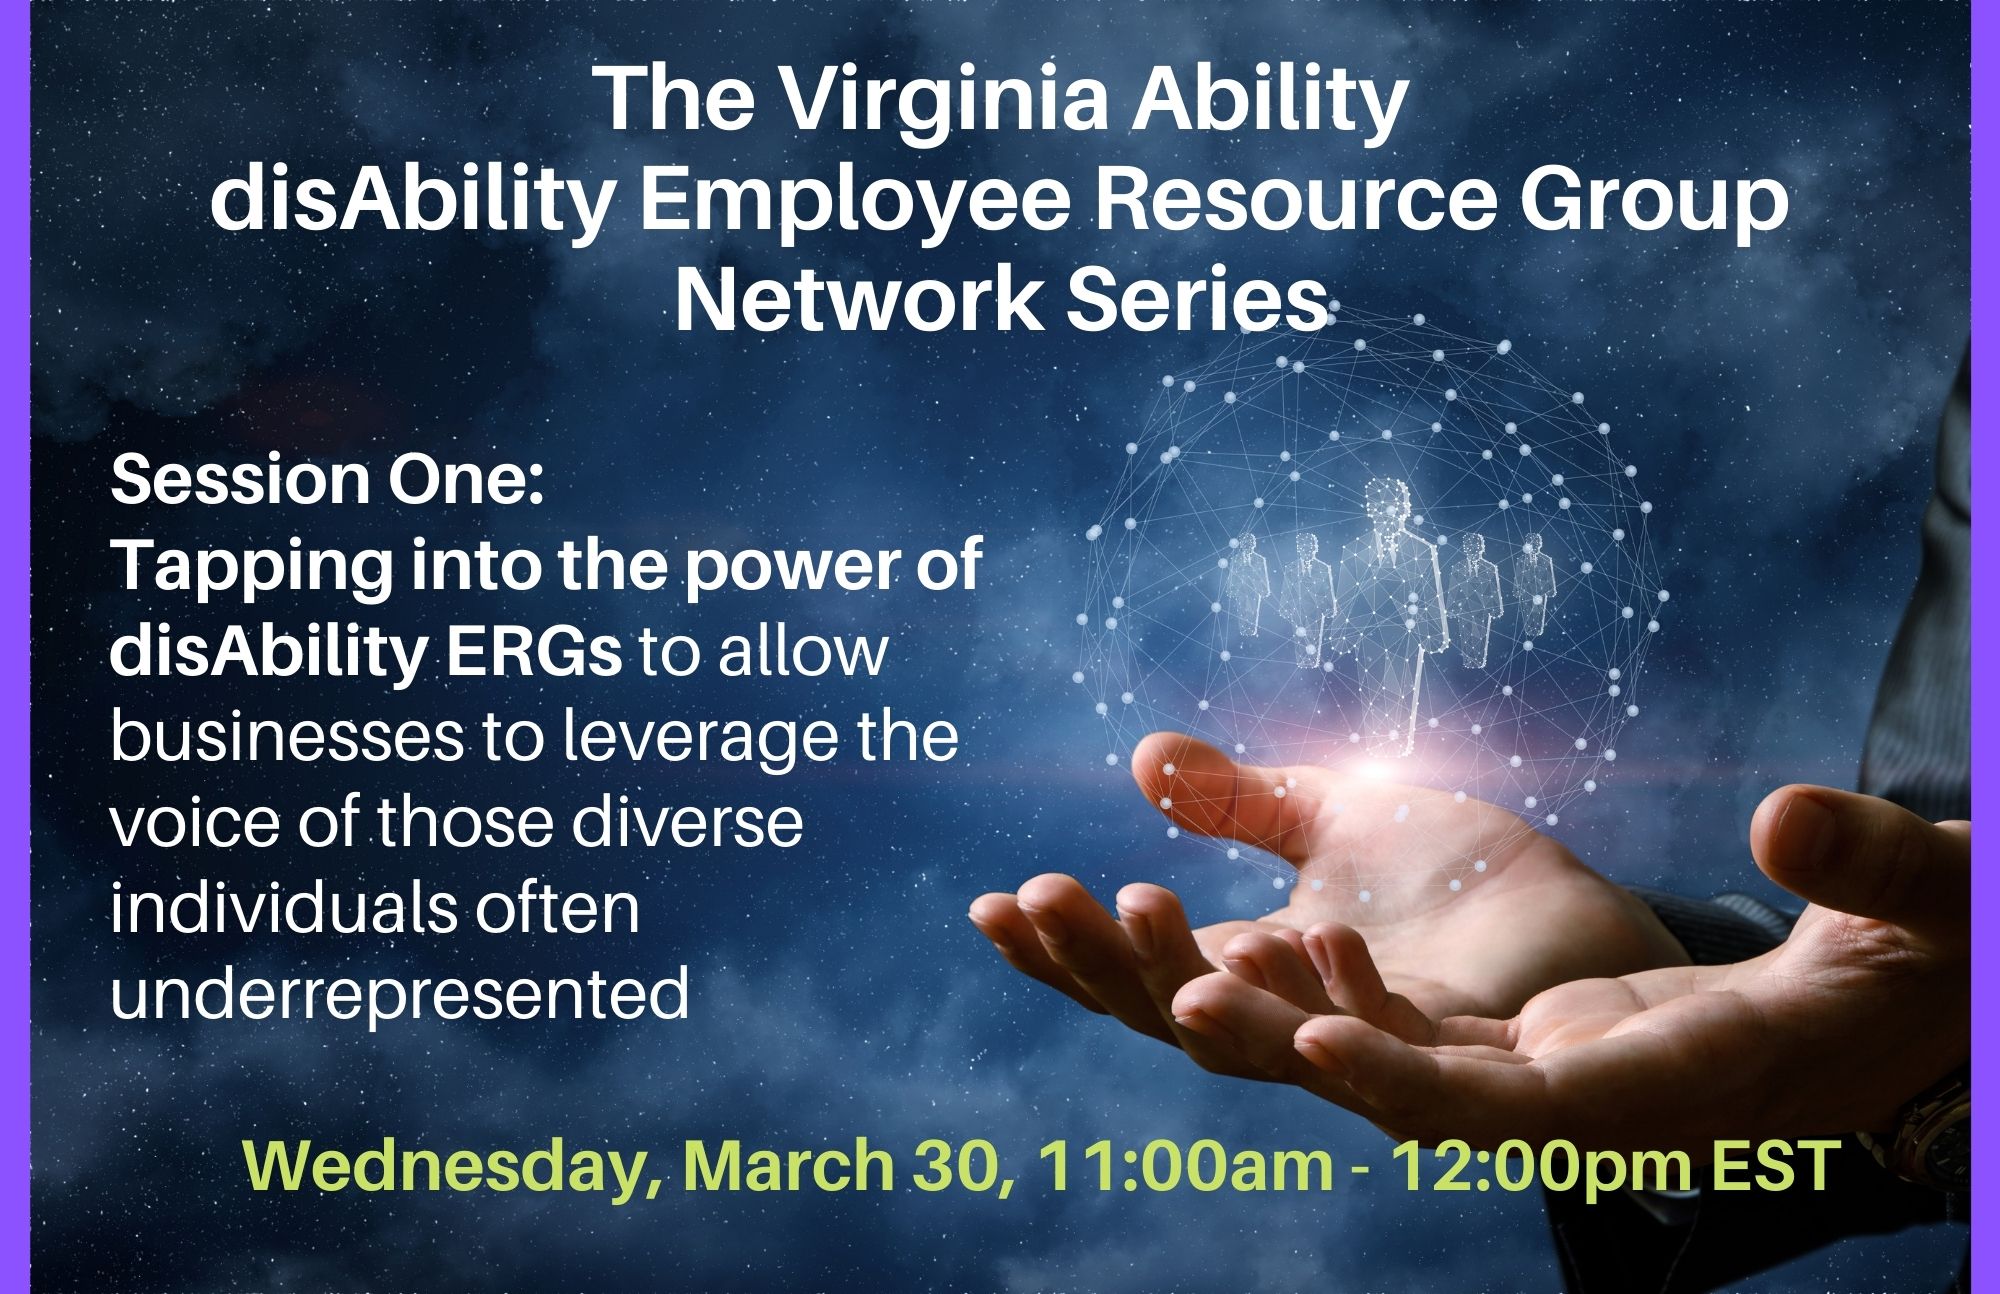 DisAbility Employee Resource Group Network